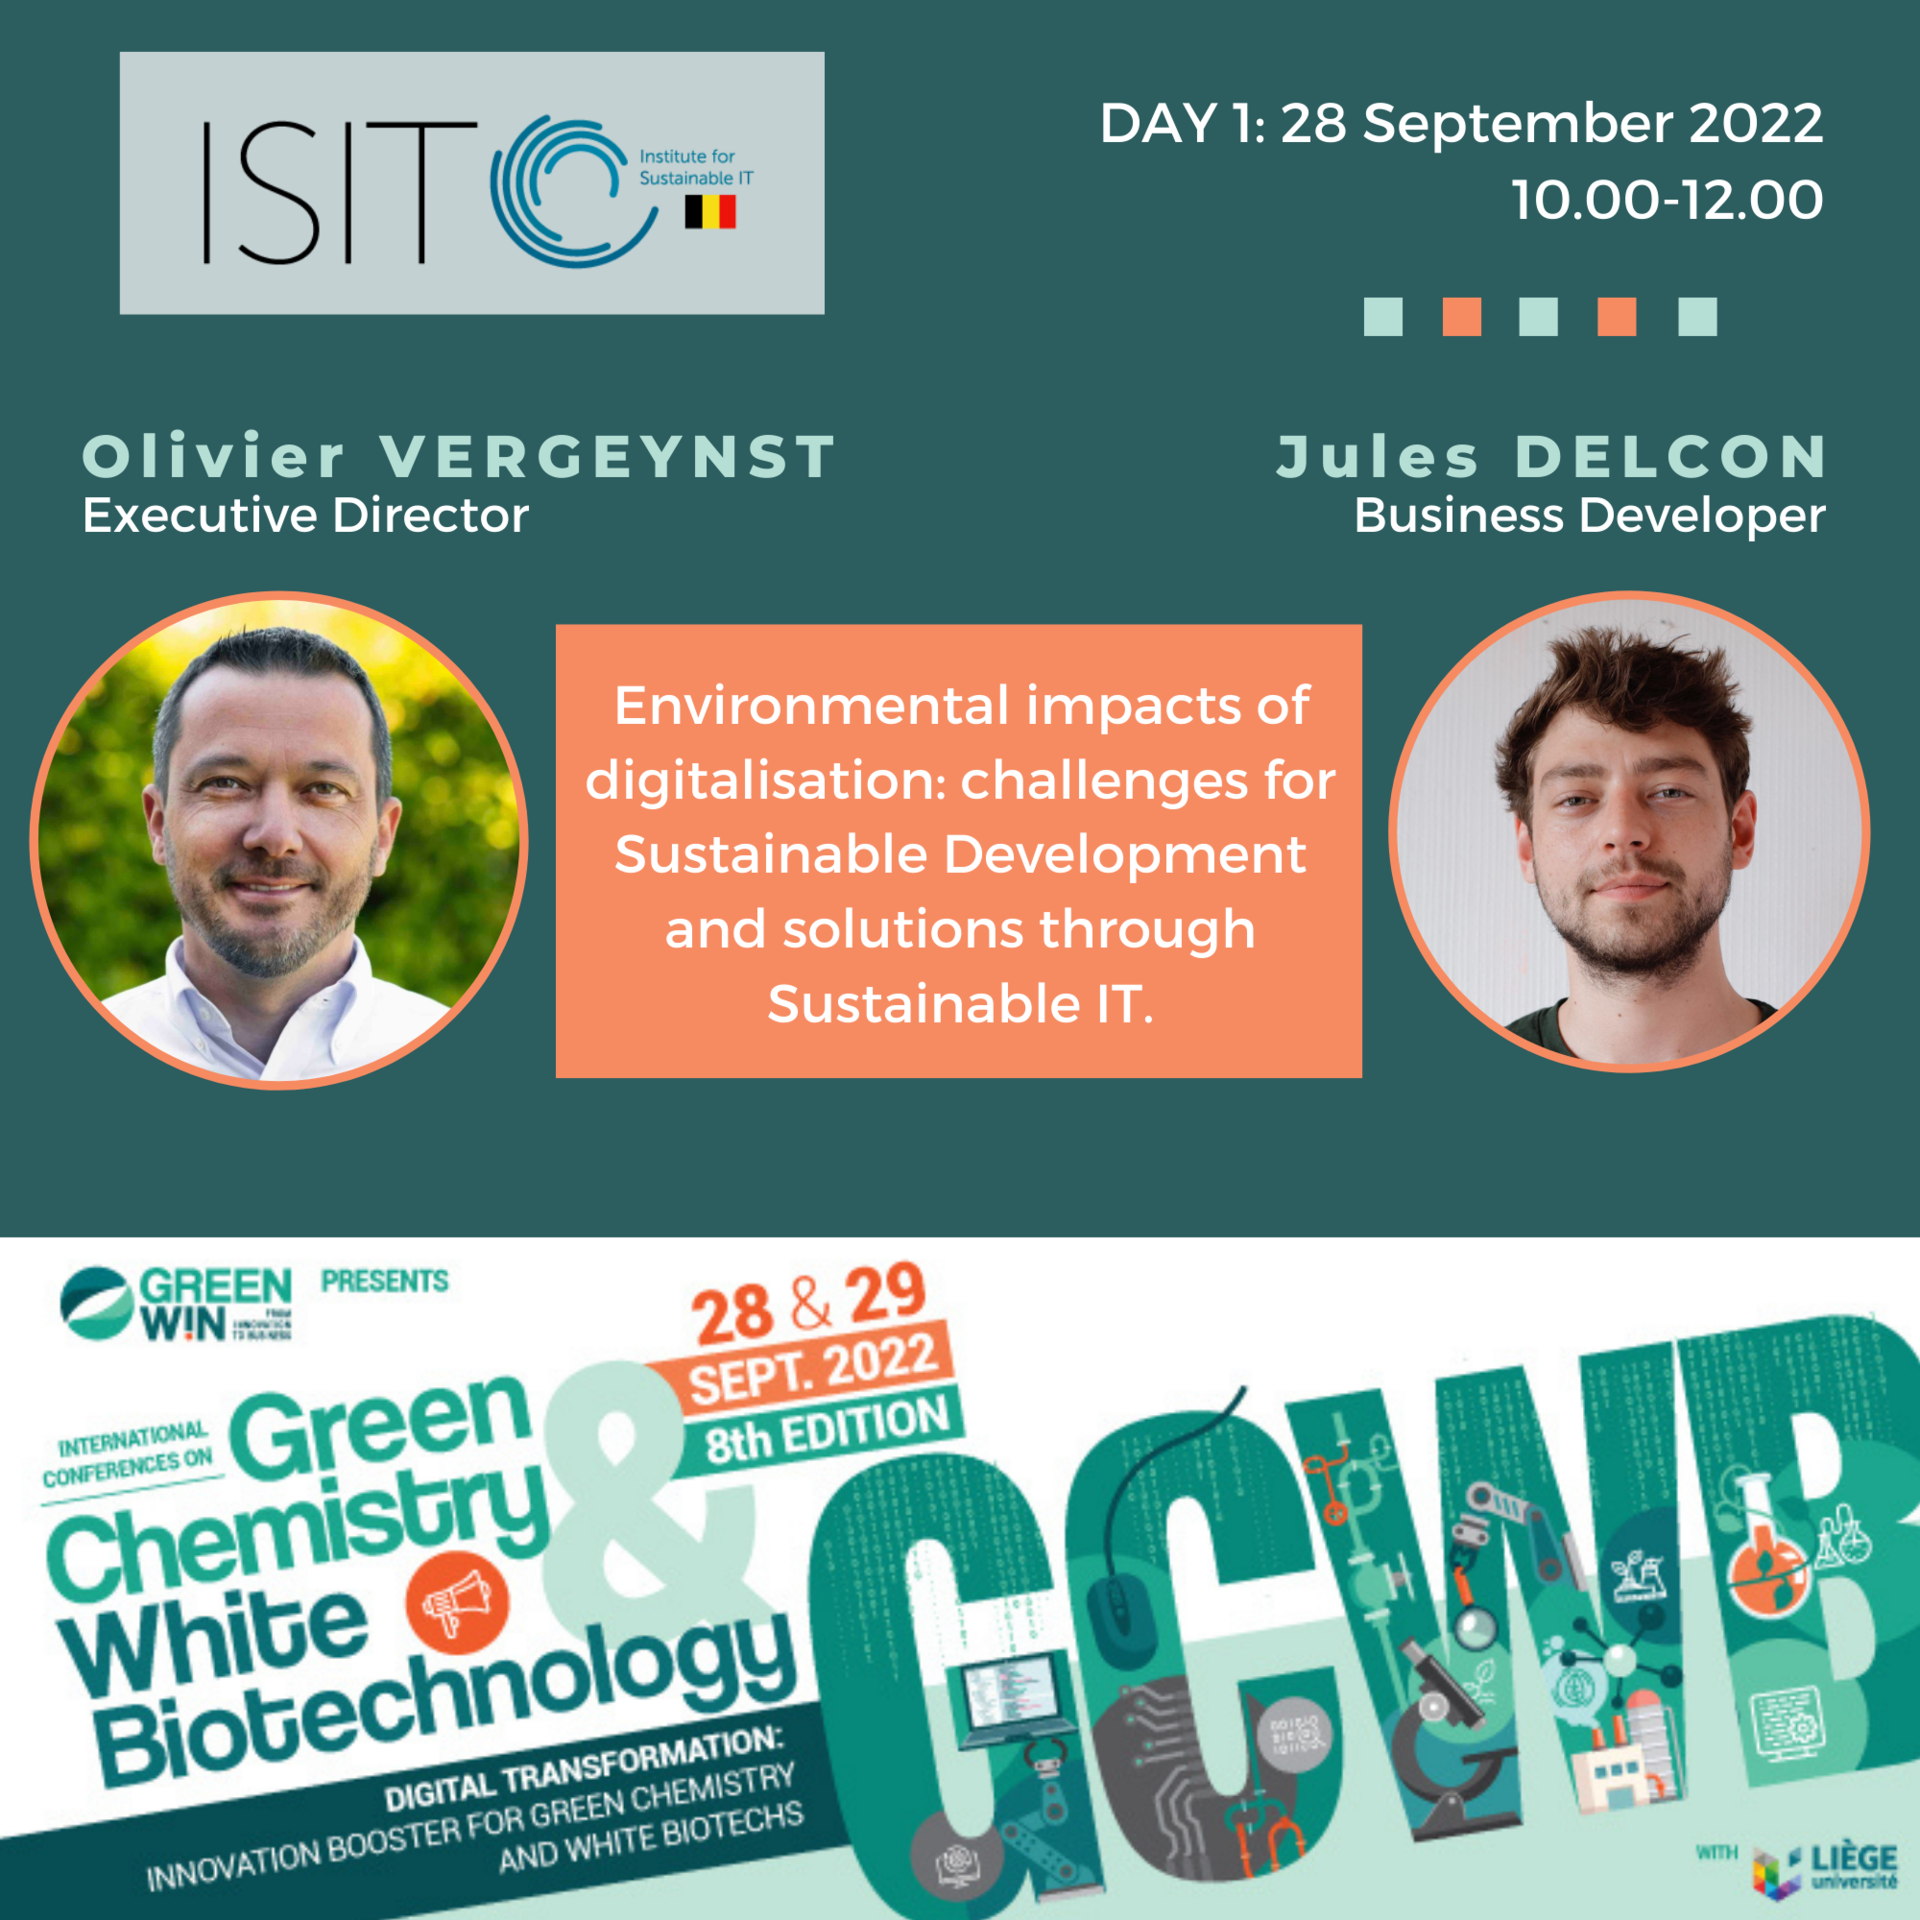 How to face the environmental impact of IT and how can Sustainable IT bring solutions ? Find out with Jules DELCON & Olivier VERGEYNST